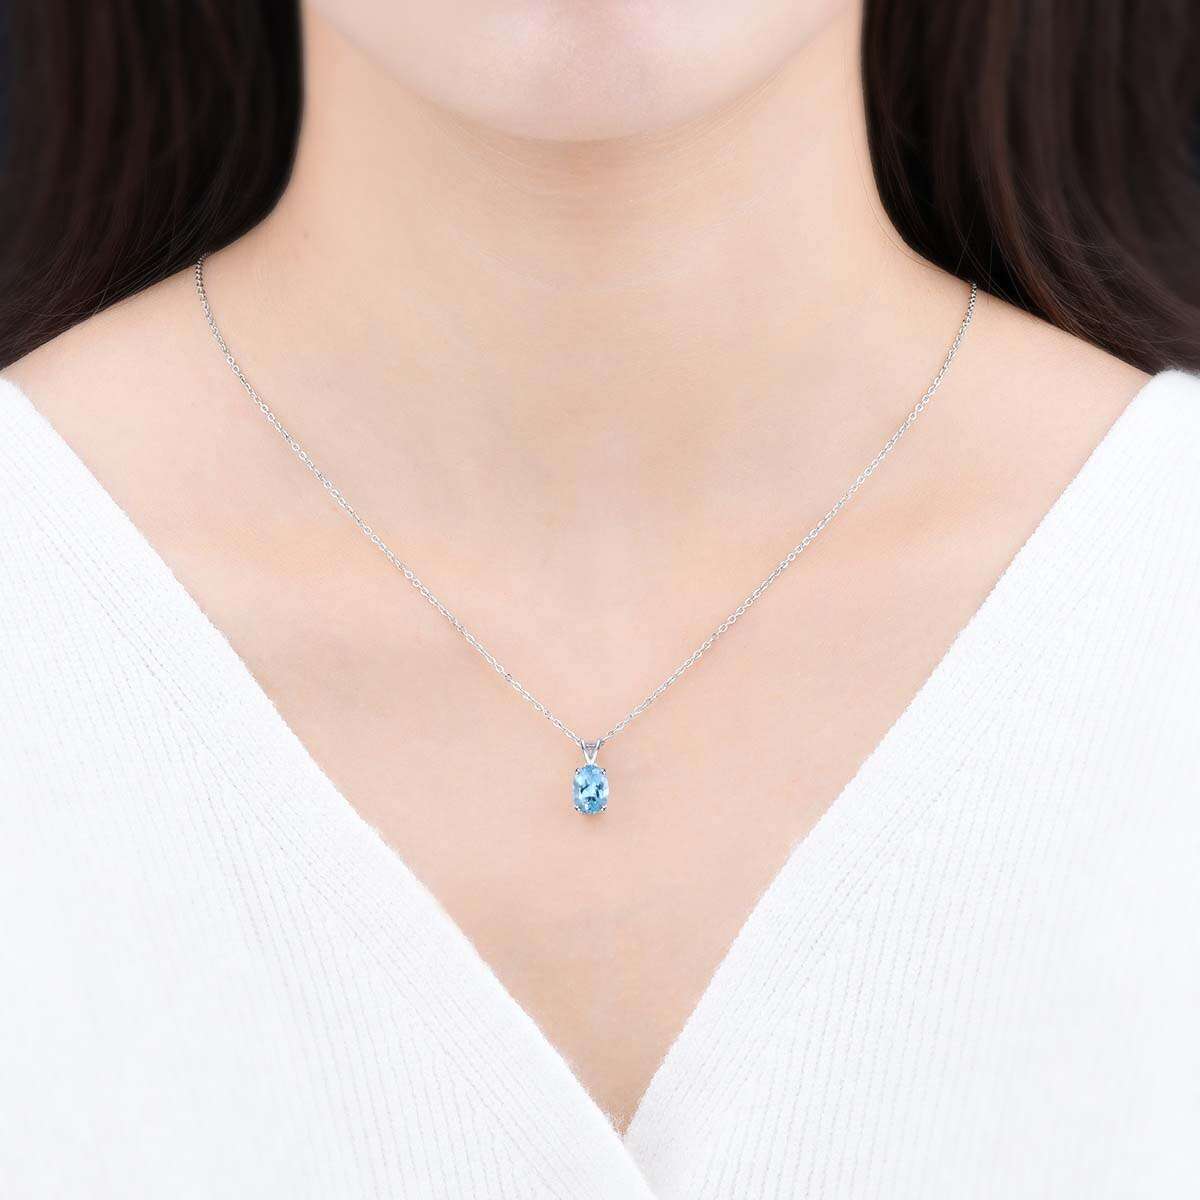 Natural Sky Blue Topaz 14K Real White Gold Pendant - Gifting By Julia M